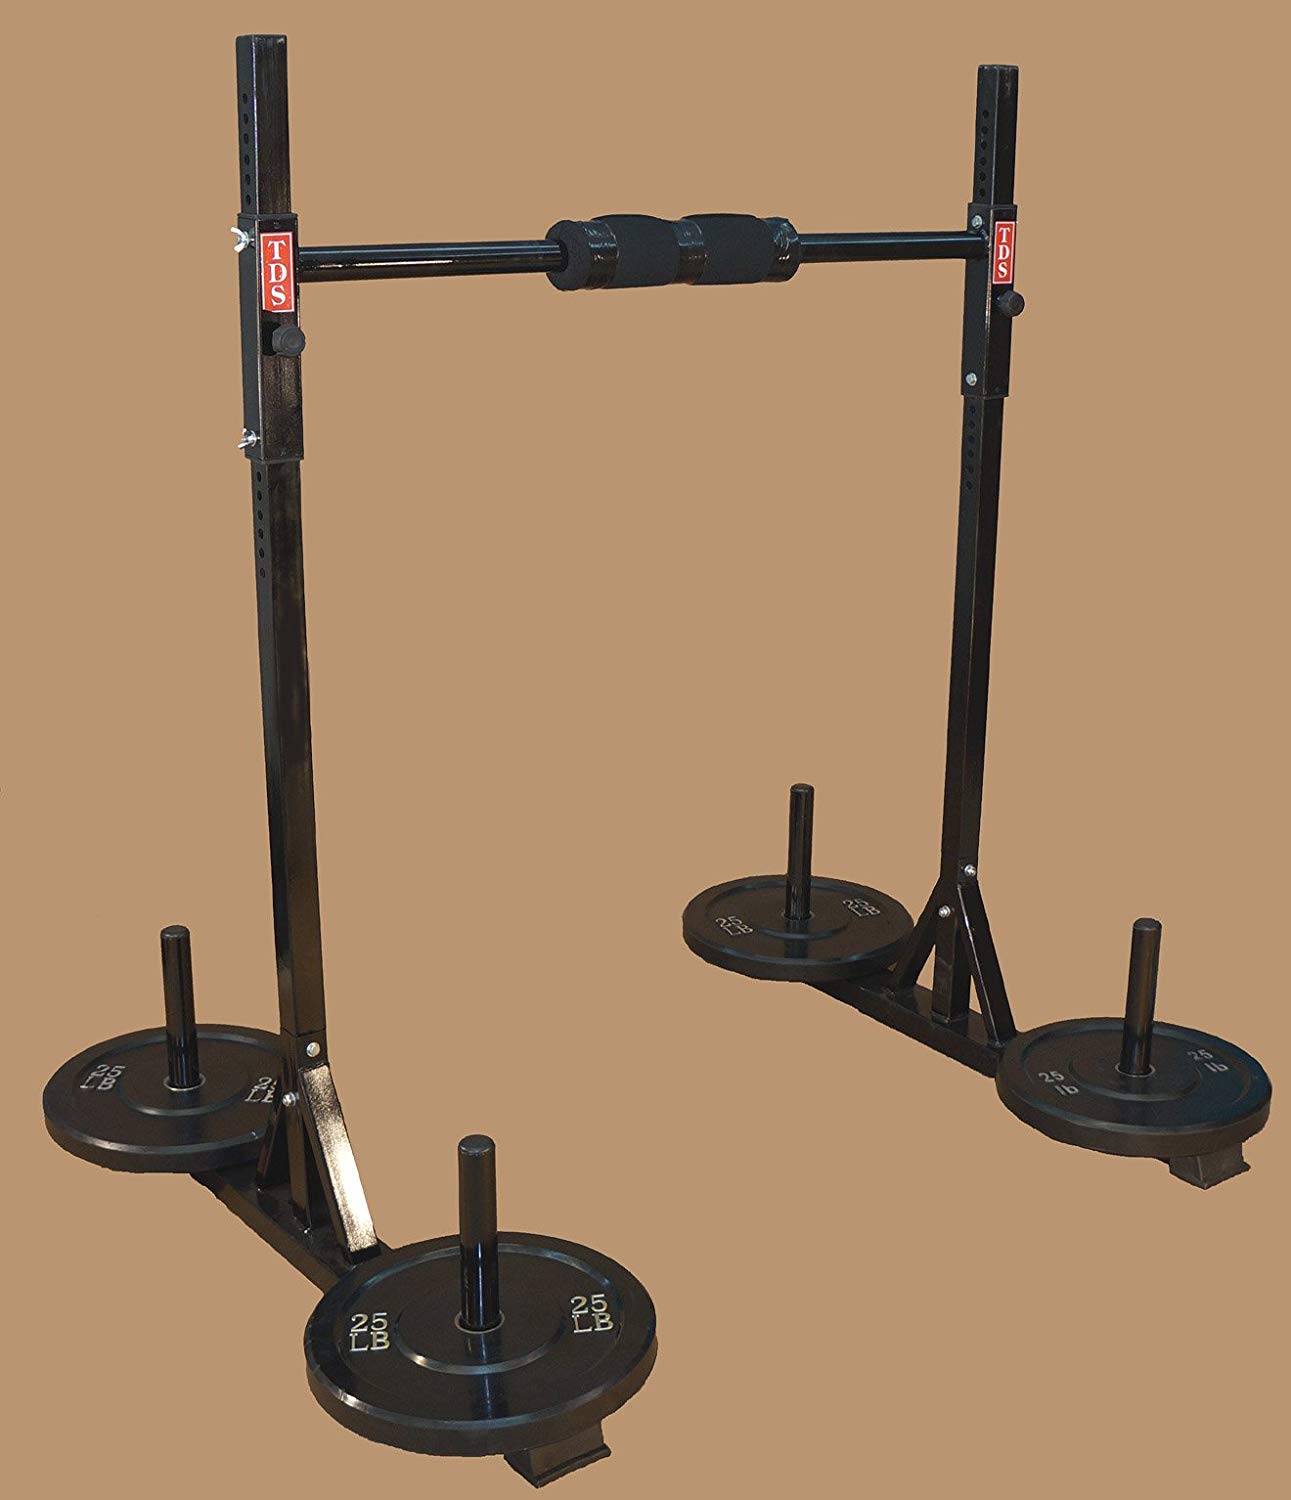  Valor Fitness Gymnastic Parallette Bars - Training Dip Bars  Push Up Stands - Build Core Body Weight Strength Balance Equipment -PR-LT :  Sports & Outdoors